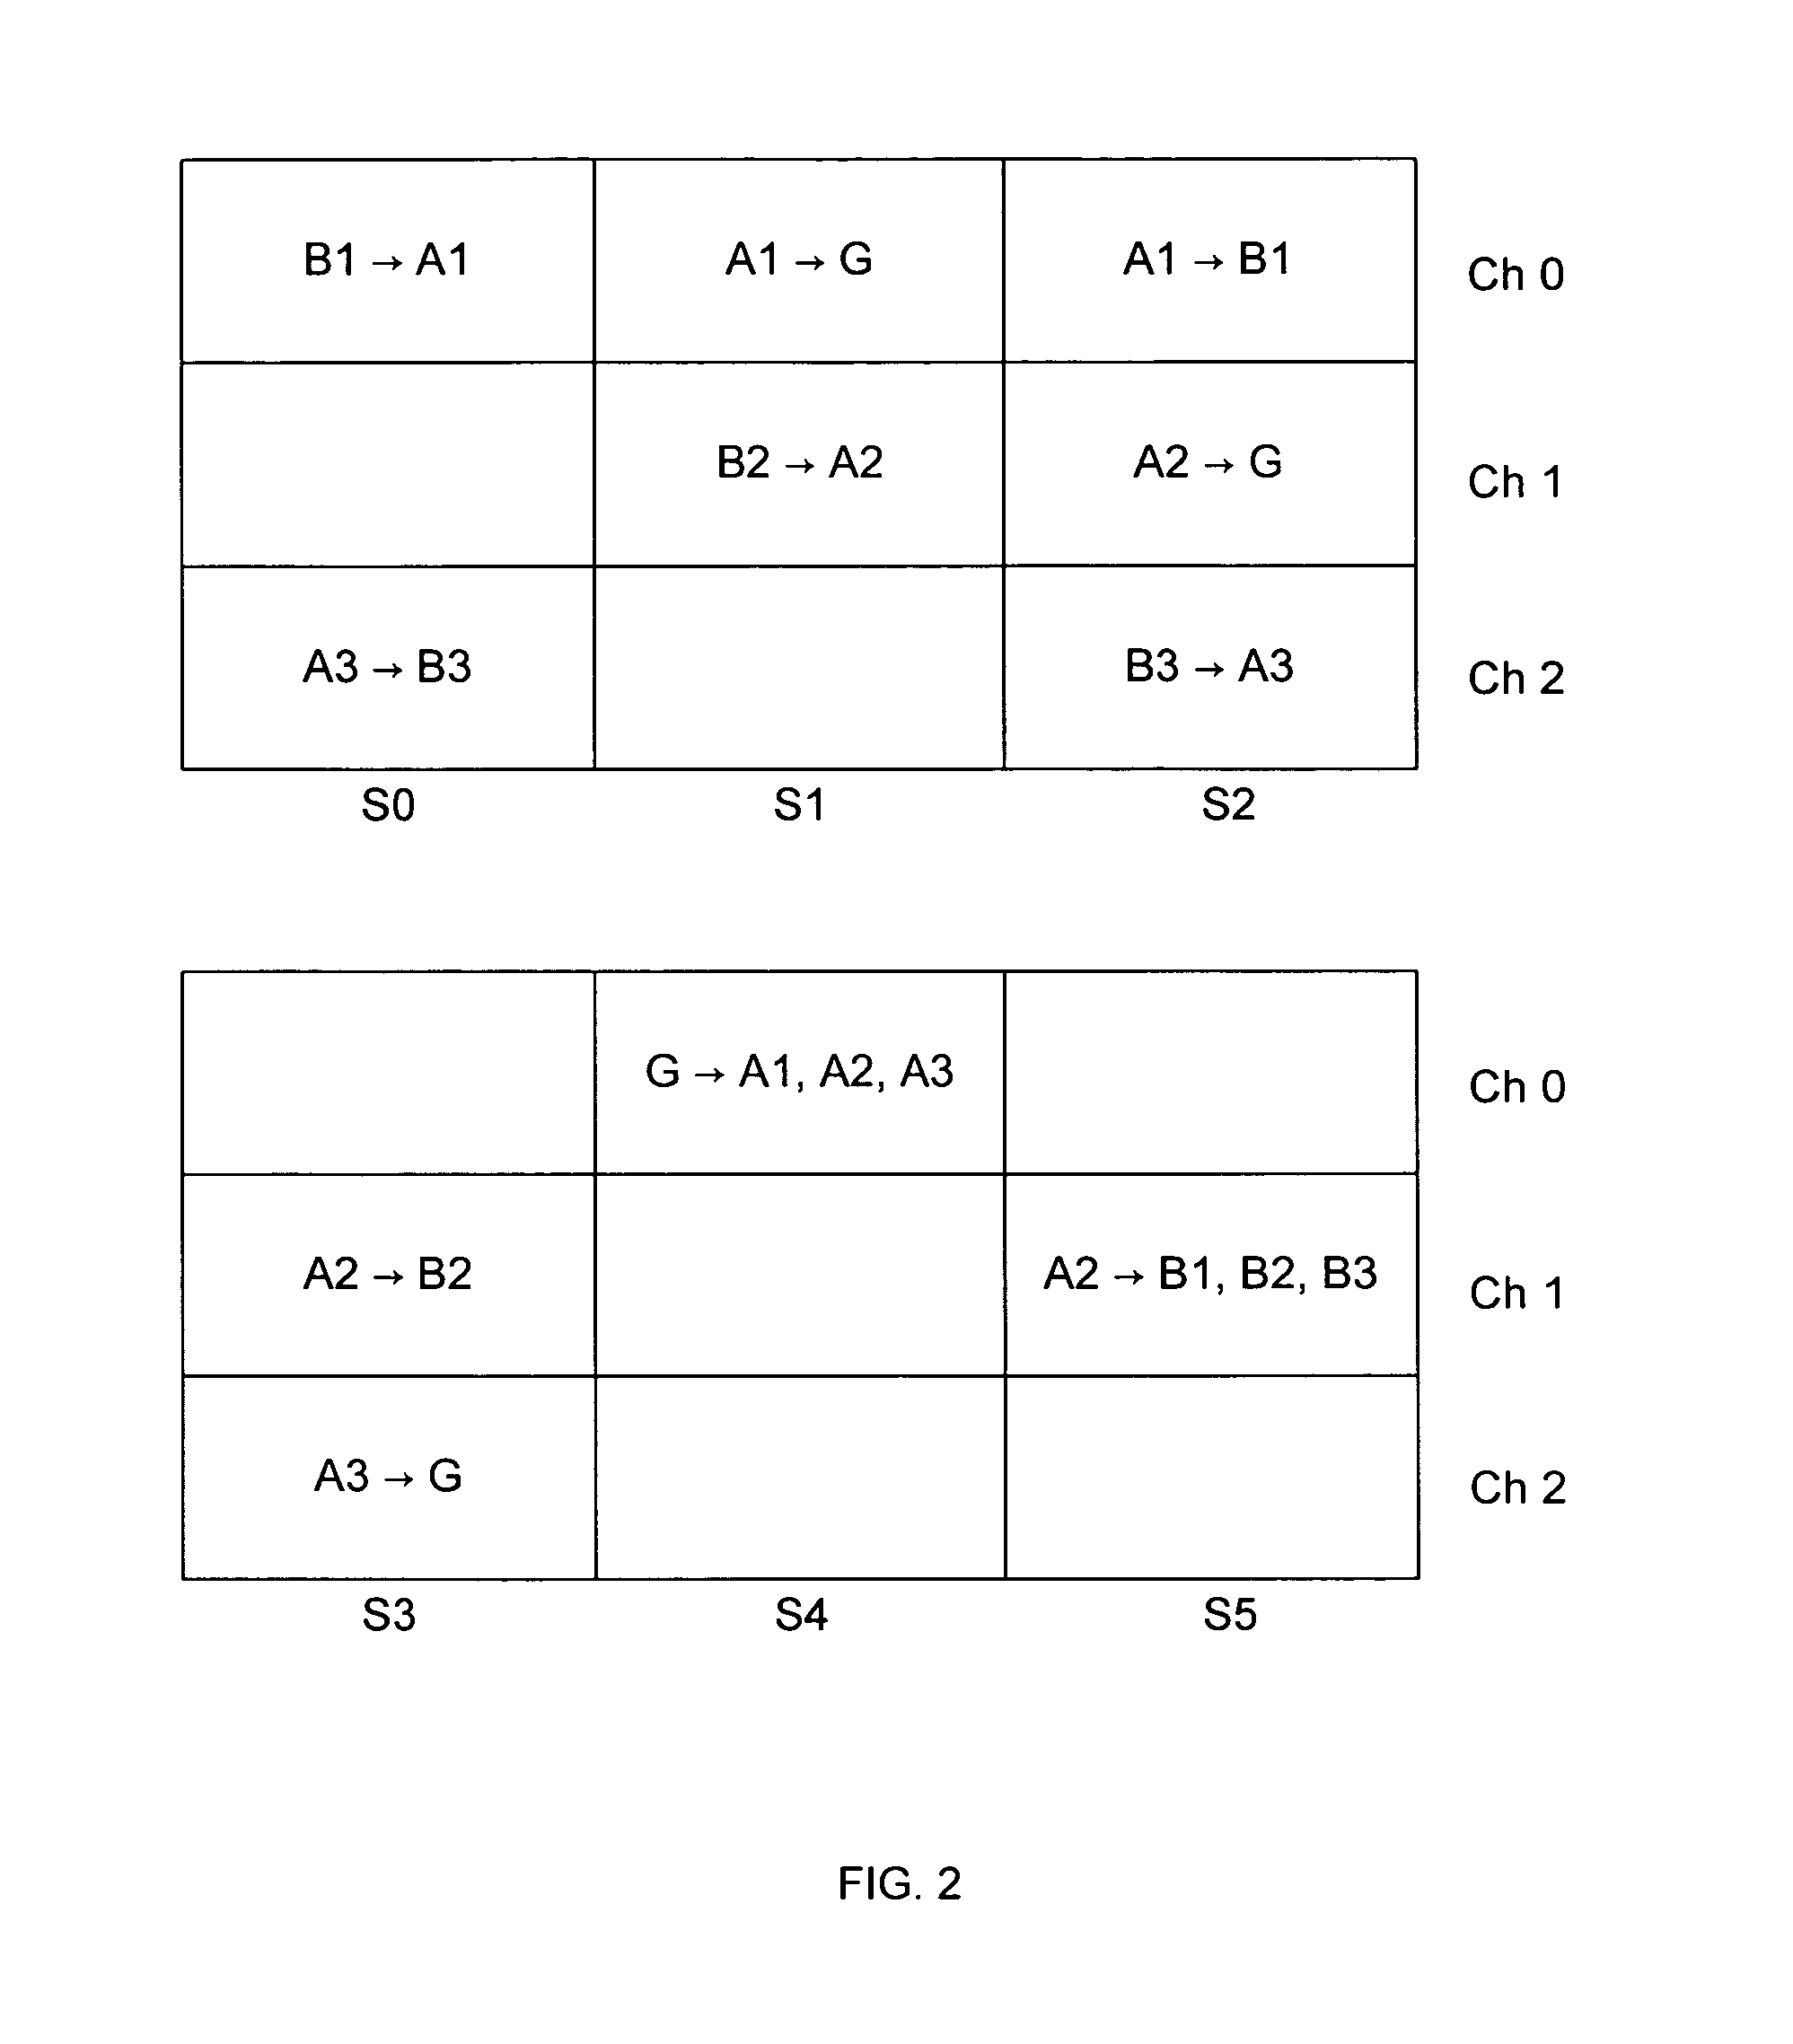 Timing calibration for crystal oscillators within a mesh network